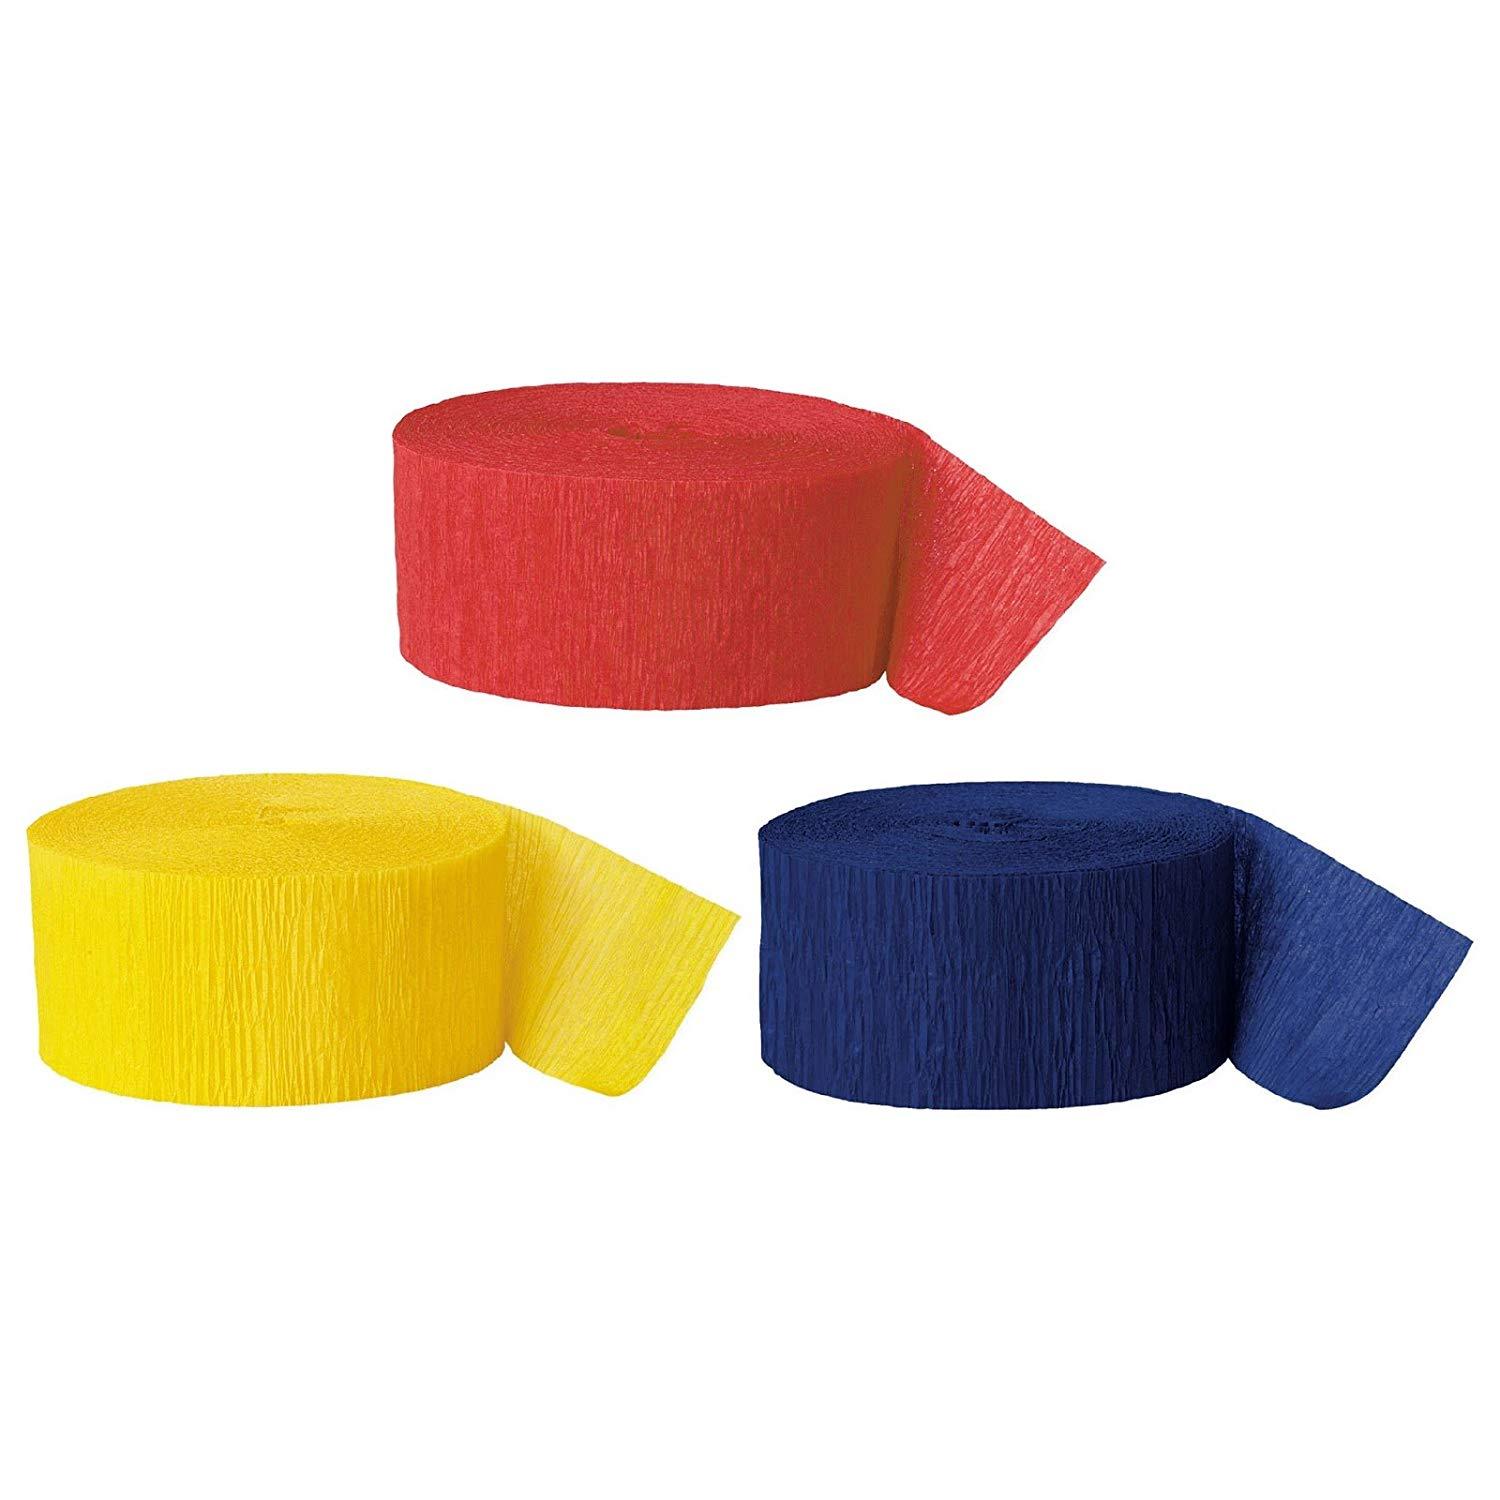 Red Blue Yellow Crepe Paper Streamer Rolls Hanging Party